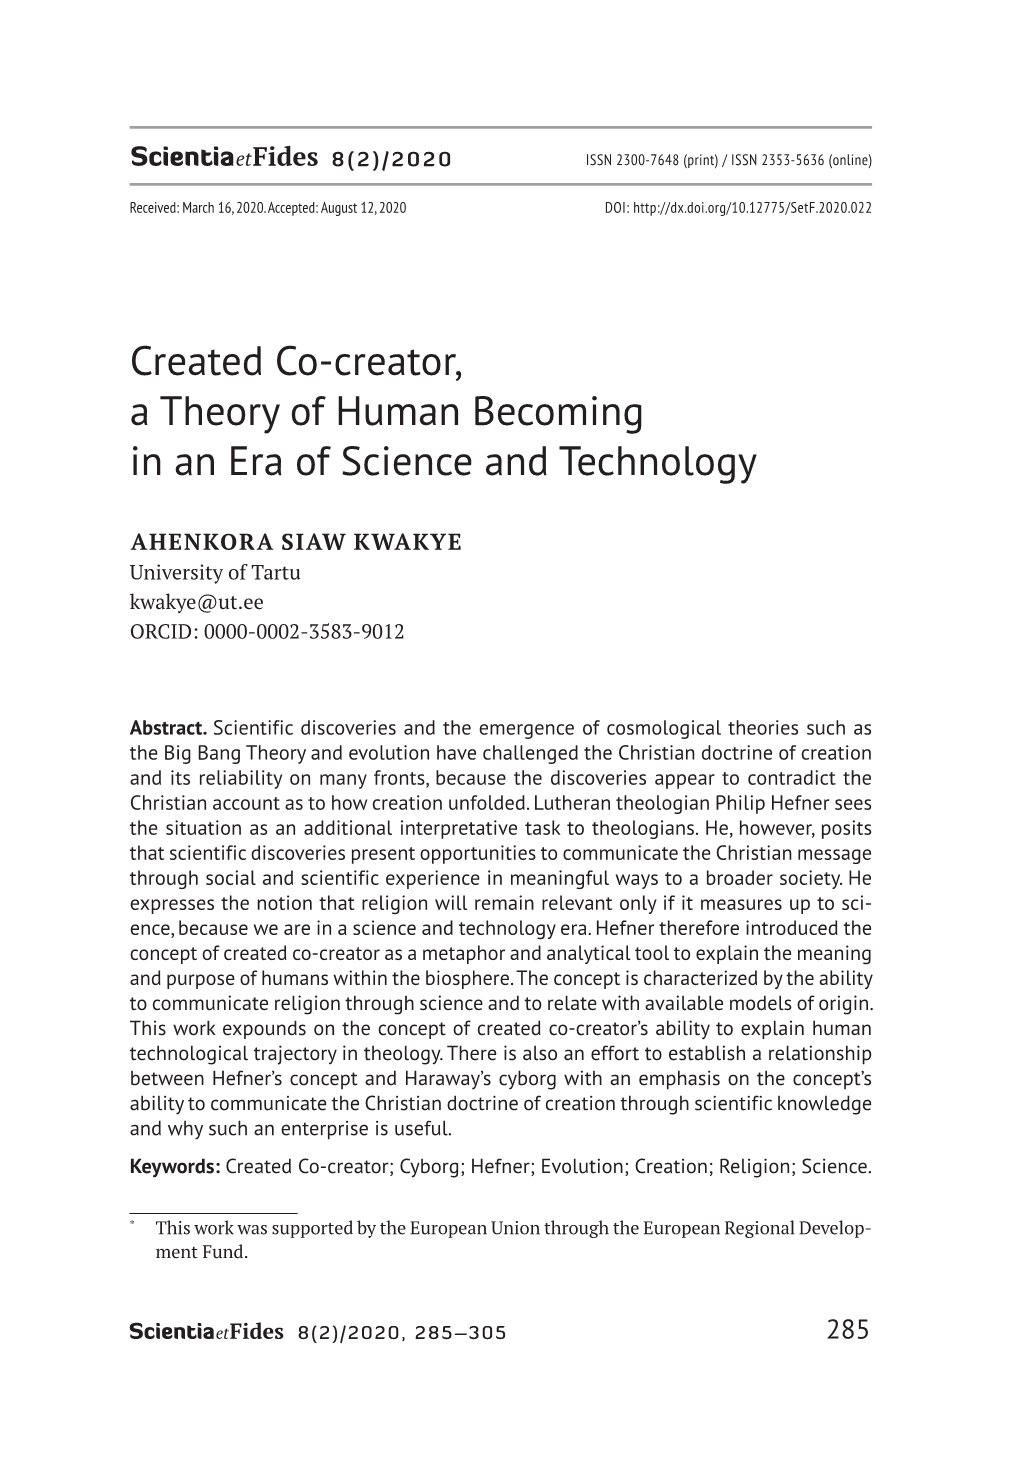 Created Co-Creator, a Theory of Human Becoming in an Era of Science and Technology